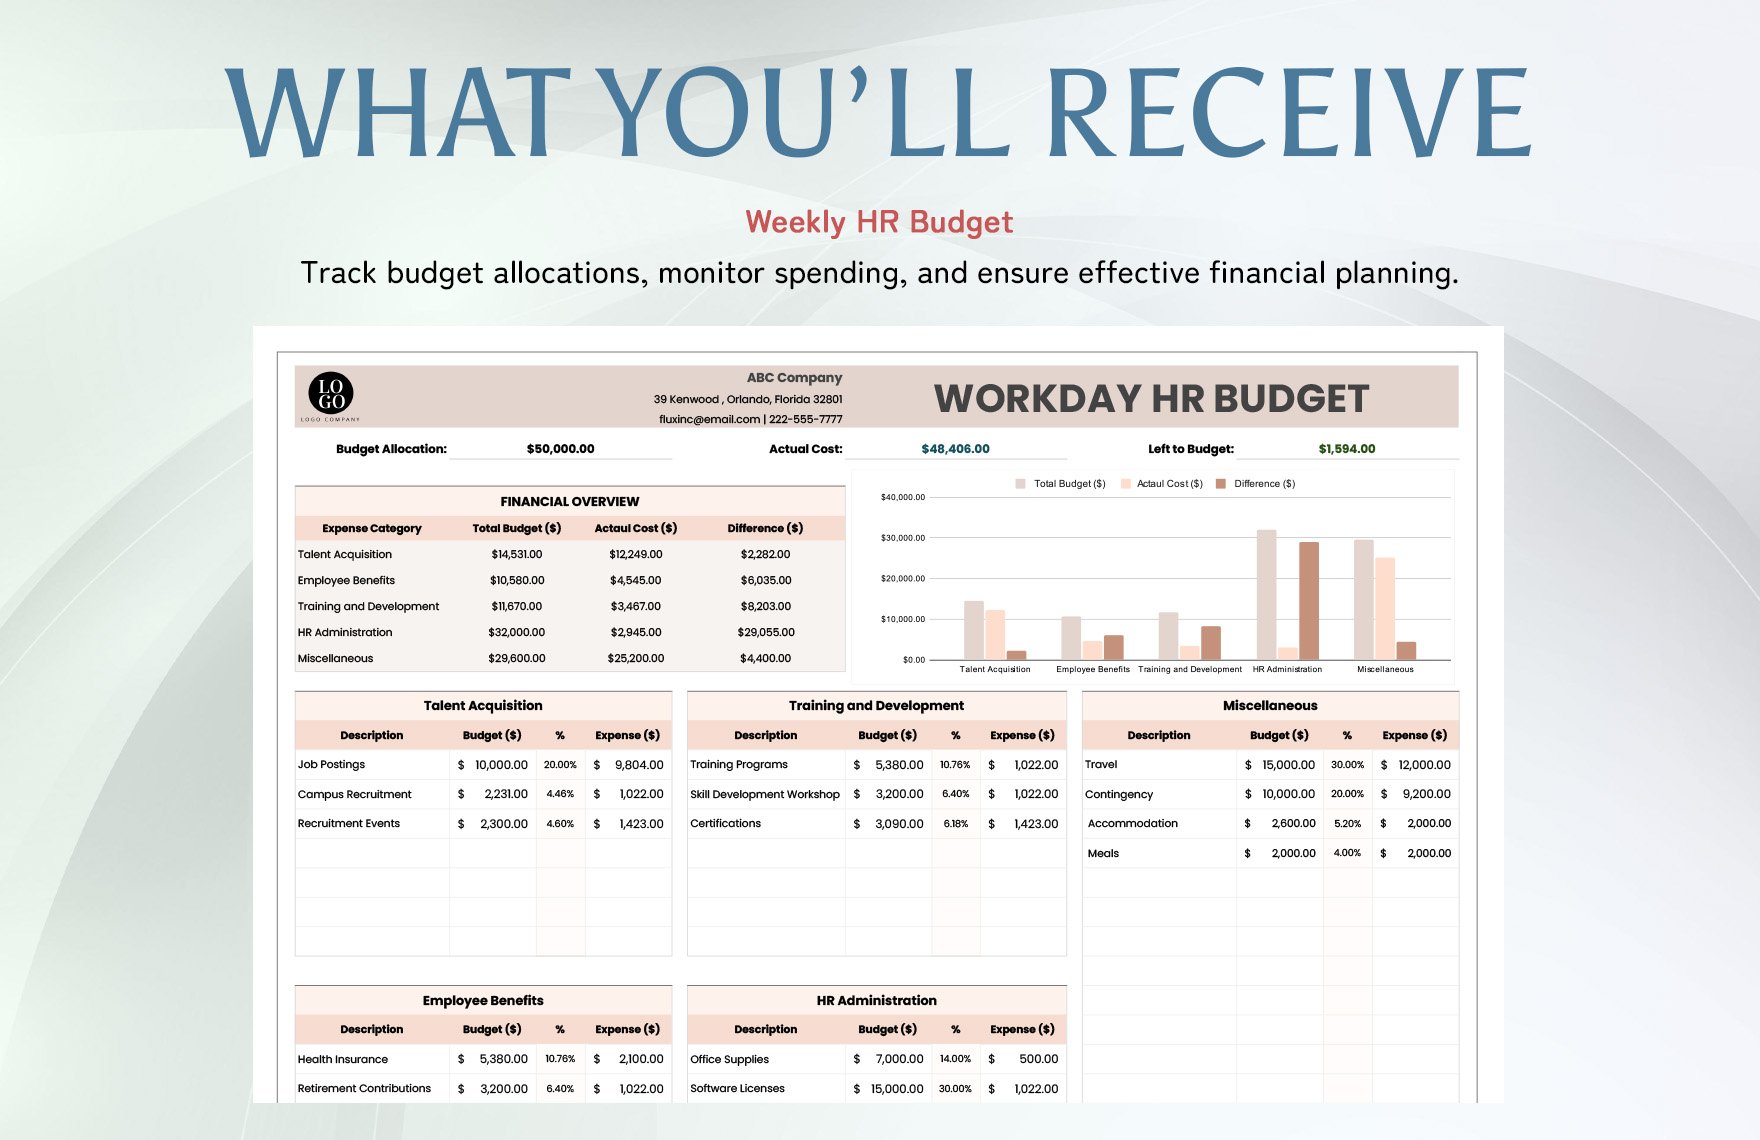 Workday HR Budget Template